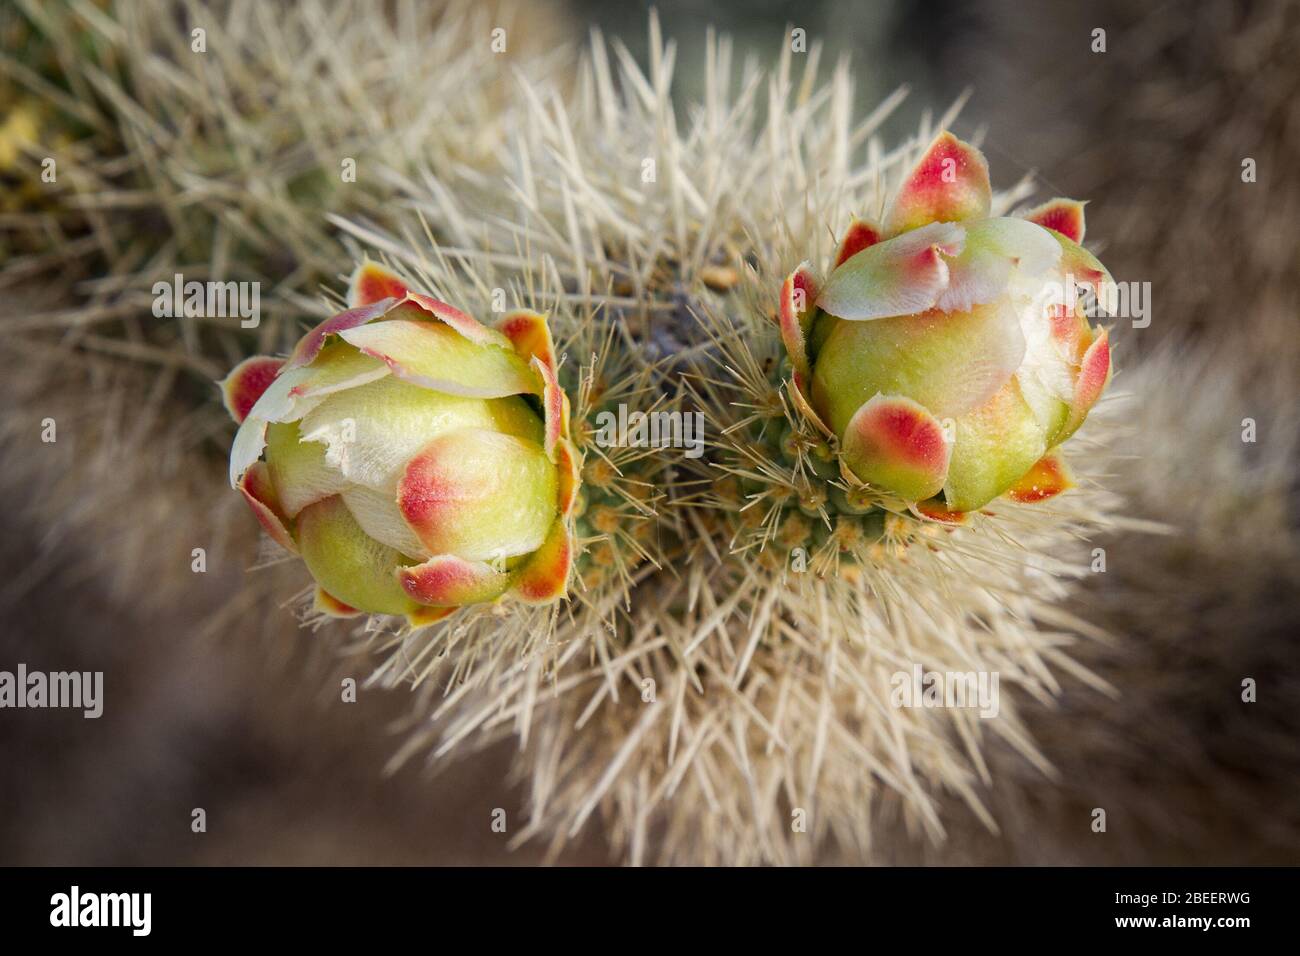 Two cactus buds sit among spines waiting to bloom on a cactus in Spring in Puerto Peñasco, Sonora Mexico. Stock Photo